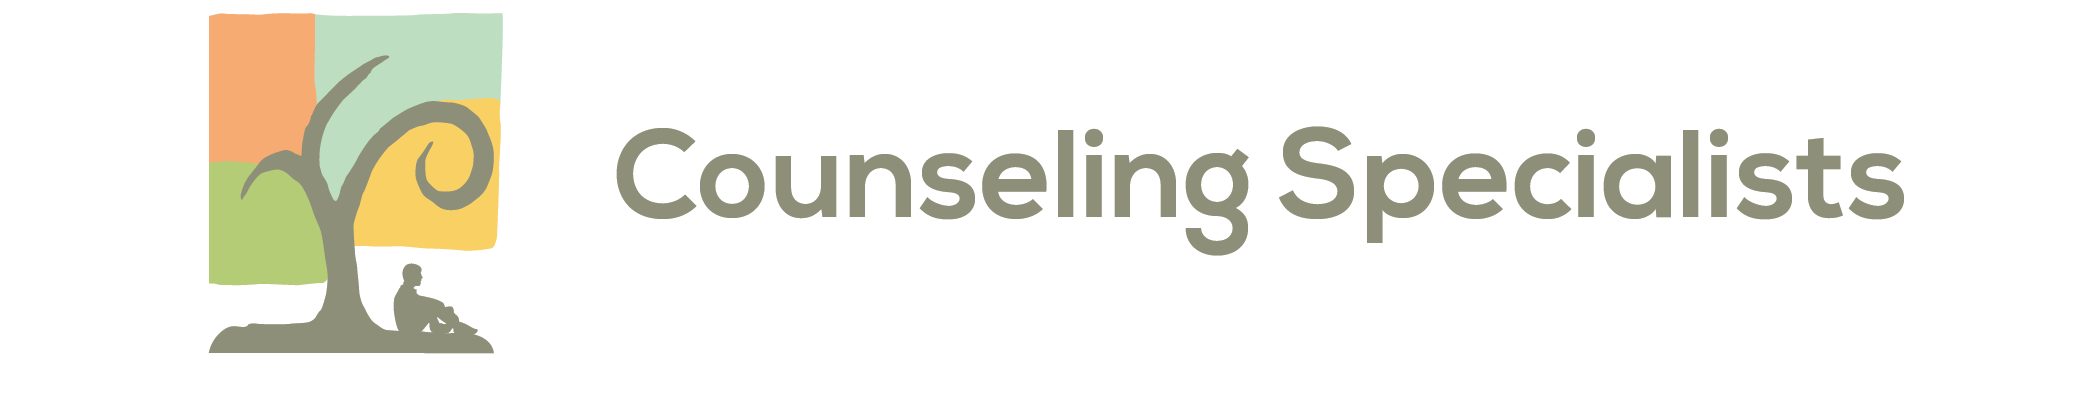 Counseling Specialists